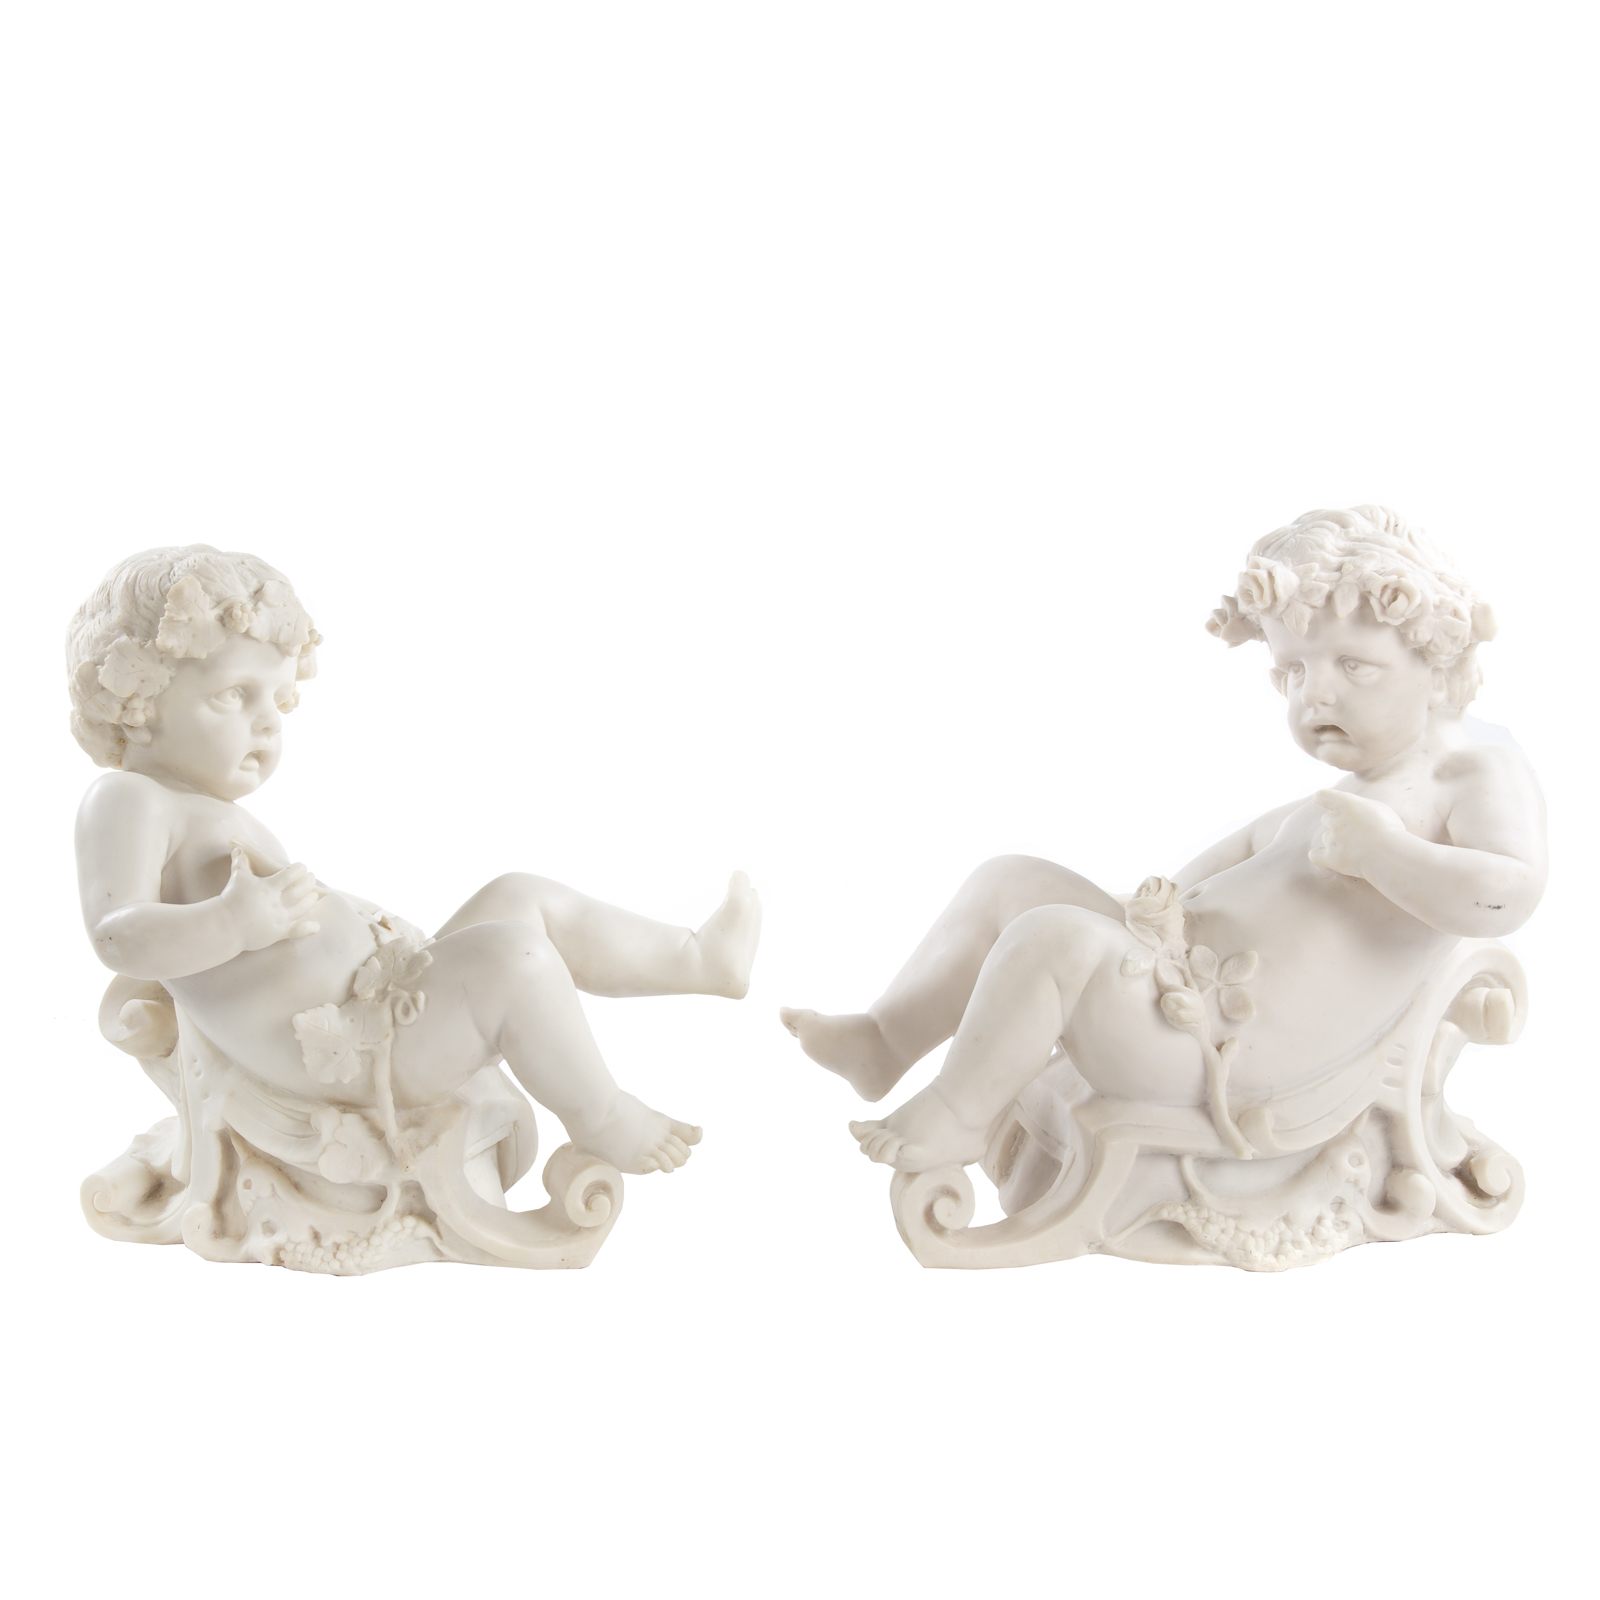 A PAIR OF PUTTI FIGURES 20th century  369a12